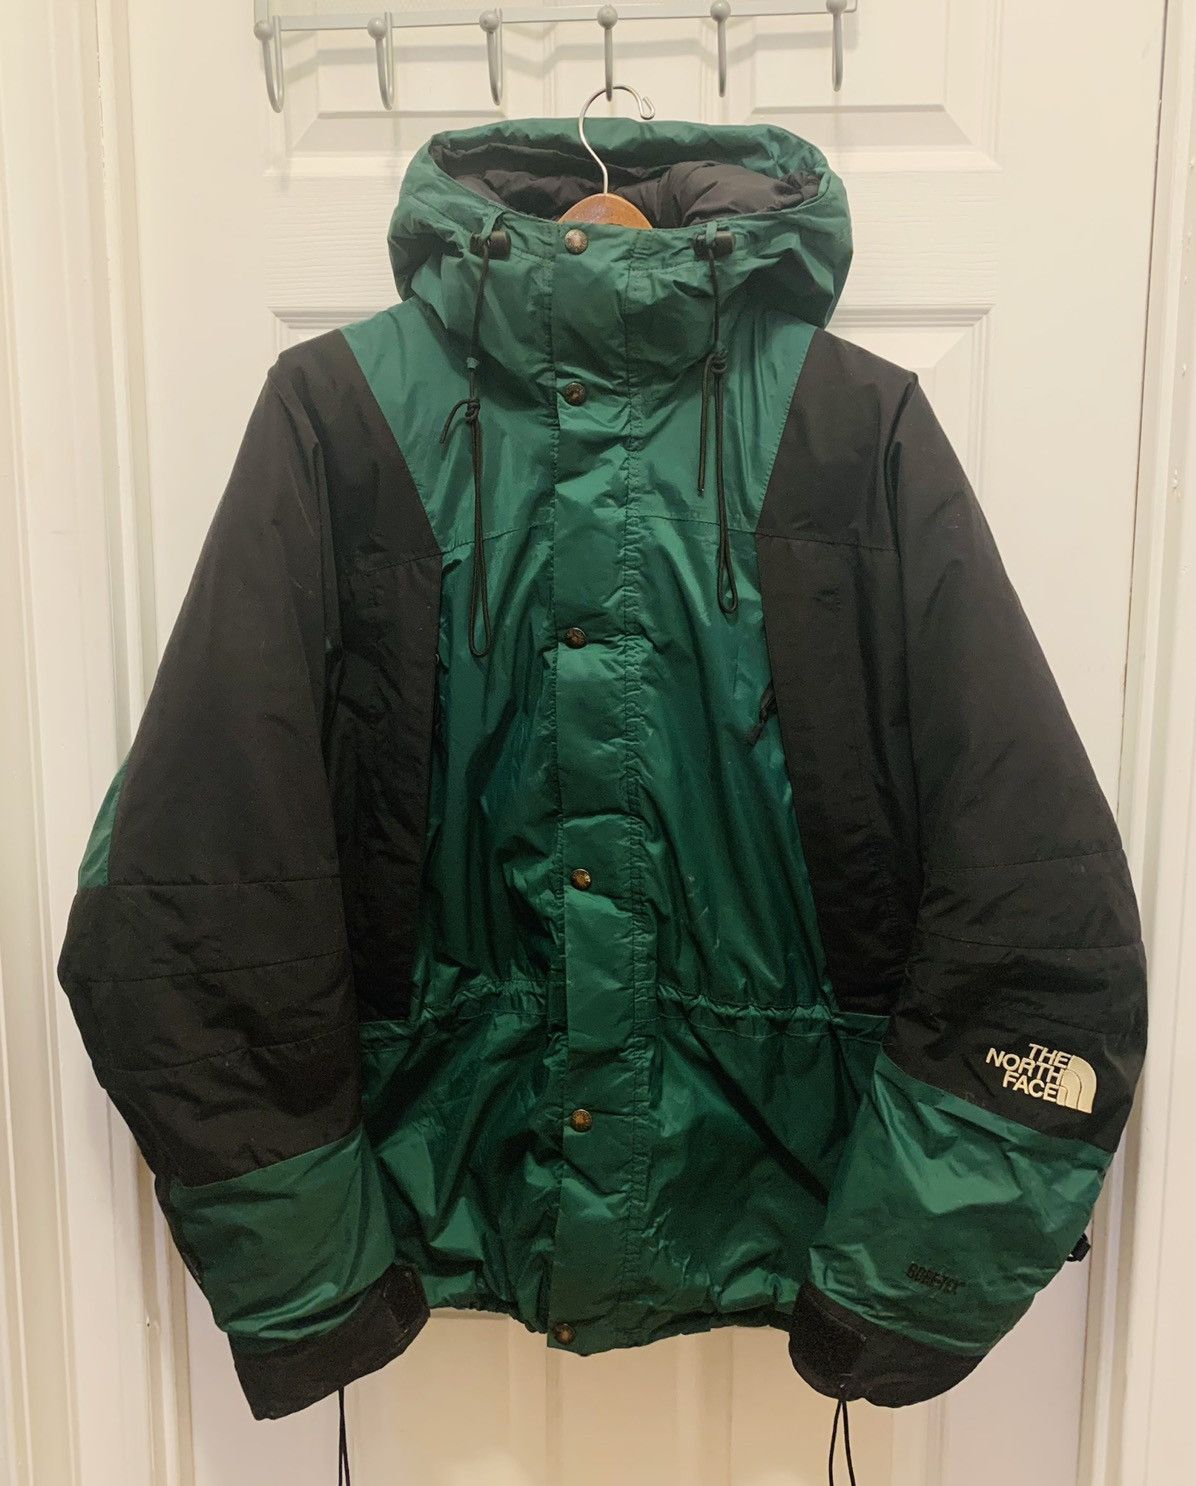 Vintage The North Face 3D Mountain Light forest green | Grailed